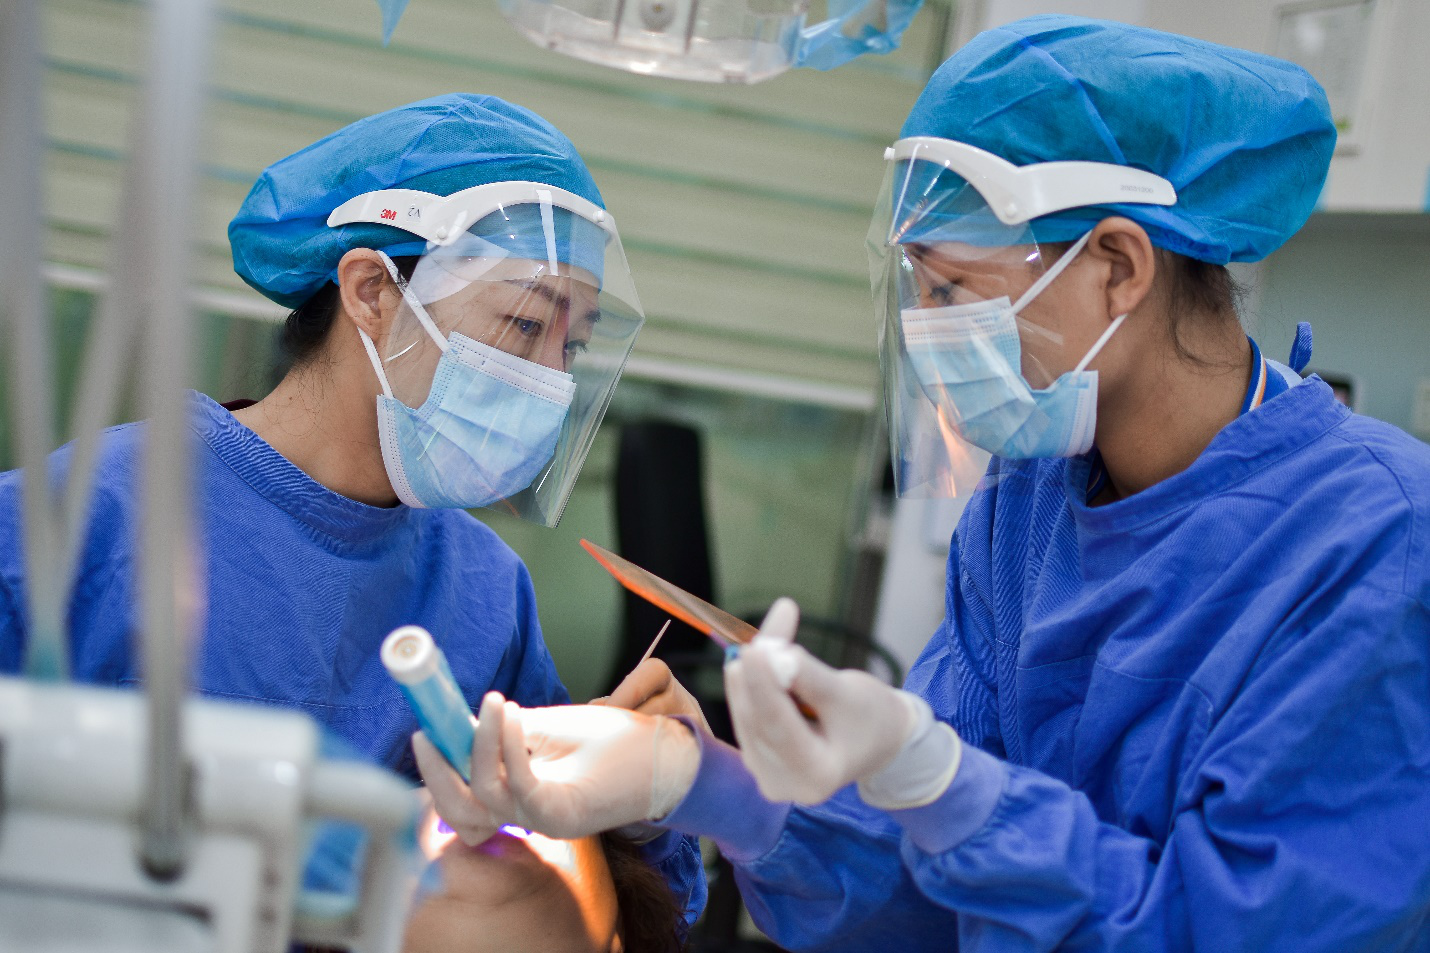 Surgeons wearing PPE while working